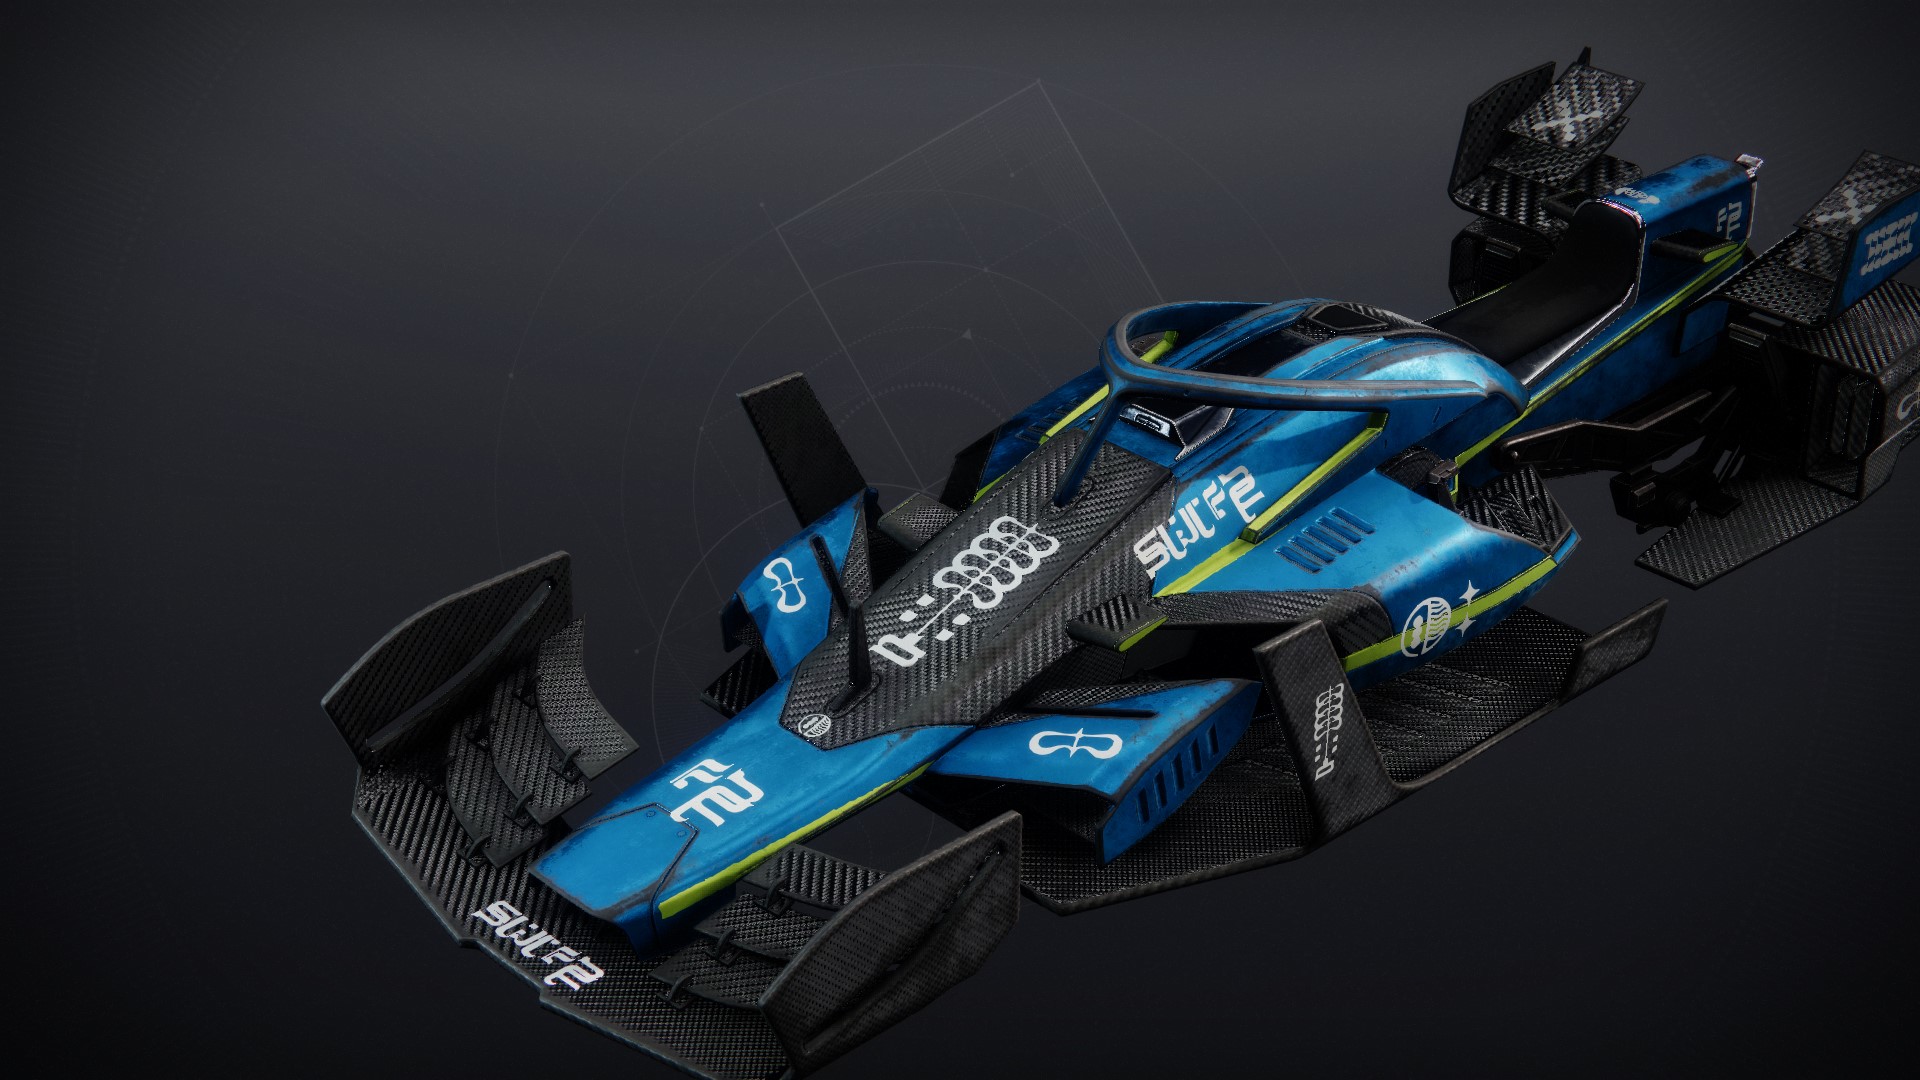 An in-game render of the Aerodynamic Chassis.